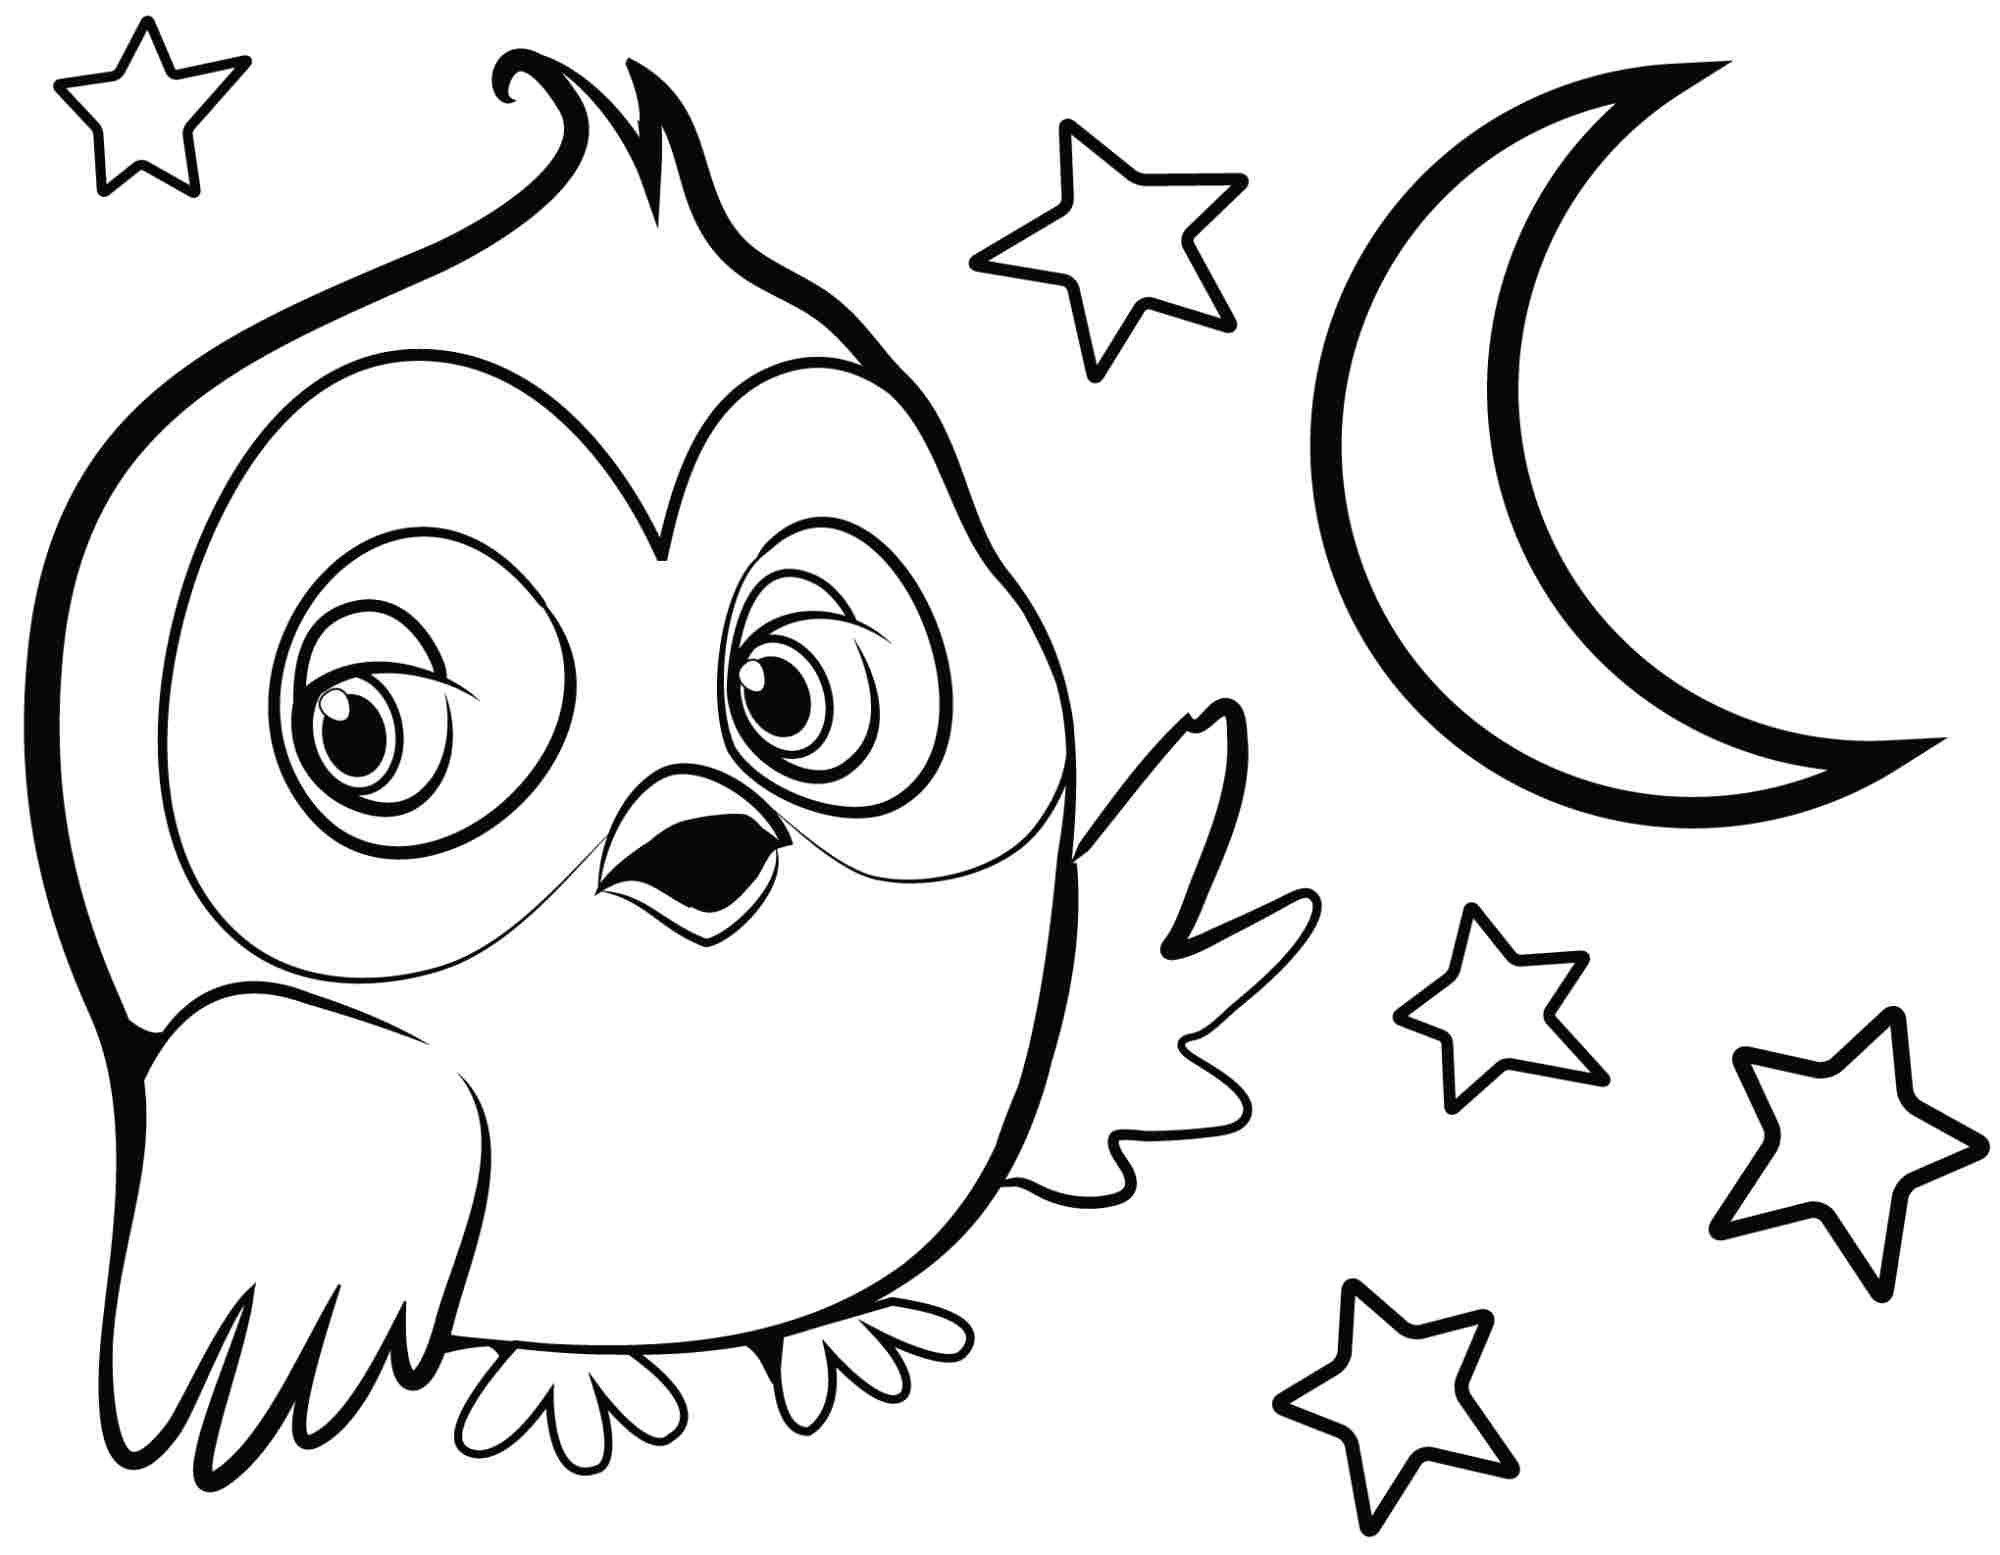 Adorable Cute Owl Coloring Pages Pdf Free - Adorable Cute Owl Coloring Pages for kids